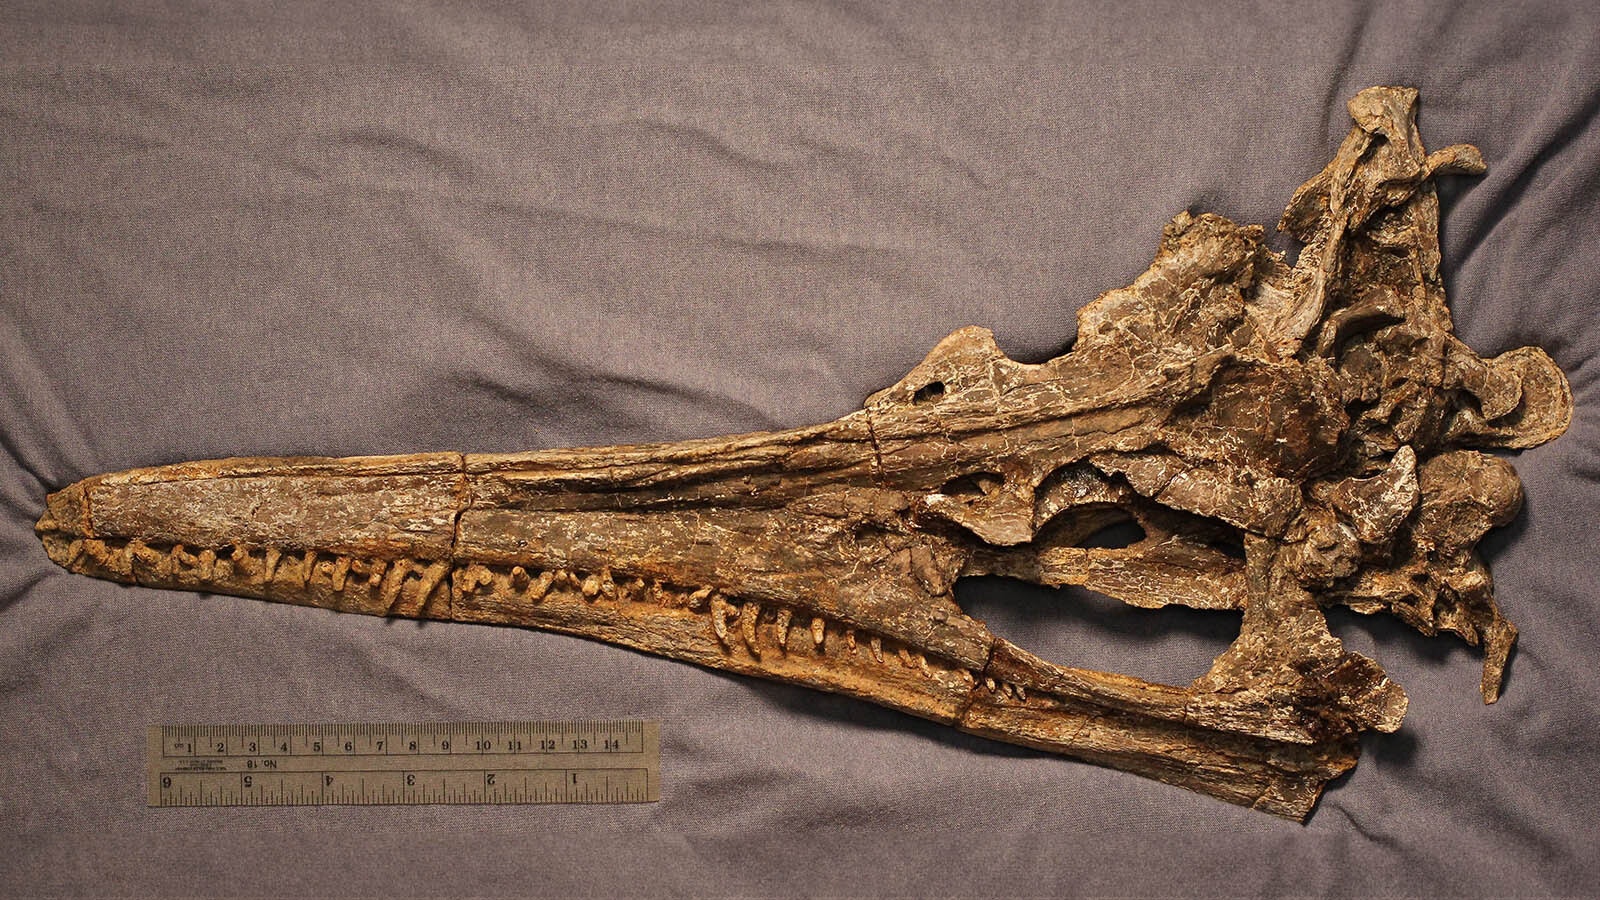 The long, narrow skull of Unktaheela, a unique small prehistoric marine reptile found in Wyoming in 1975.